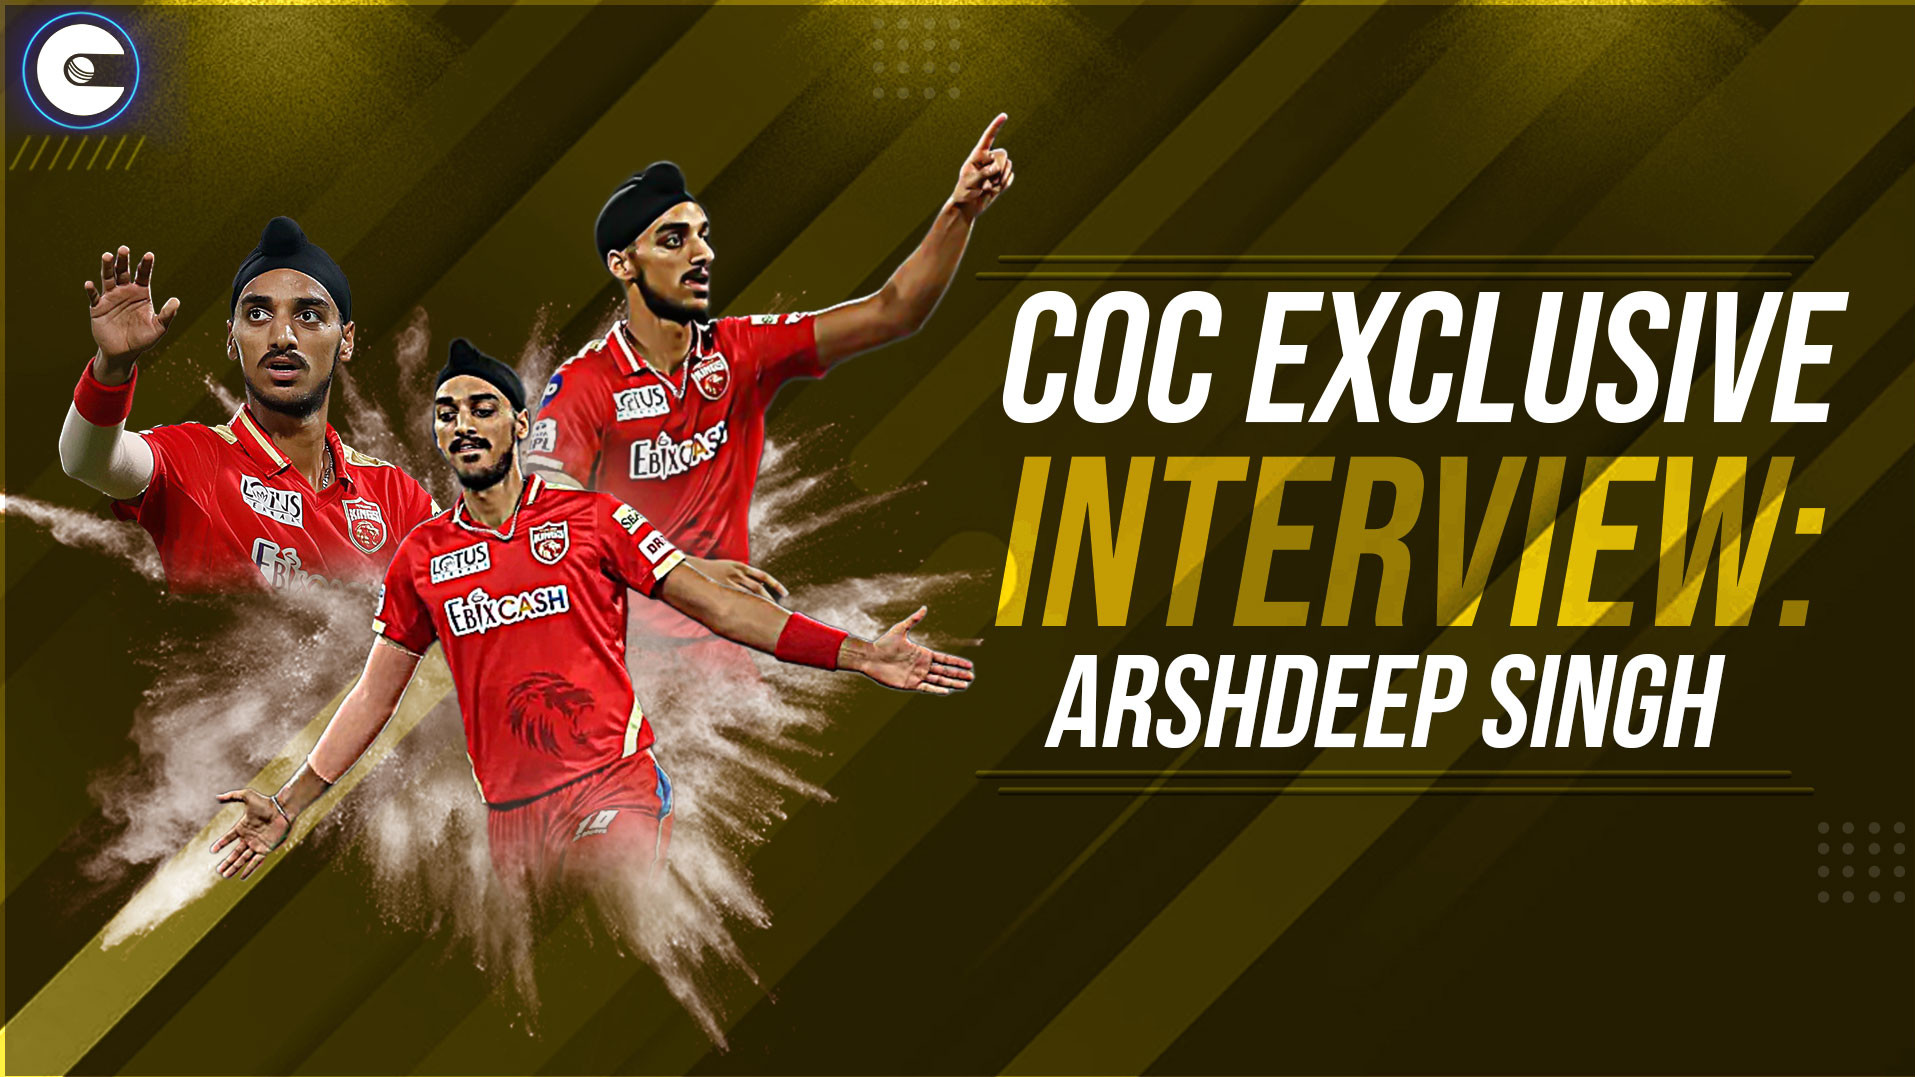 COC Exclusive: Arshdeep Singh’s interview with Ishan Mahal